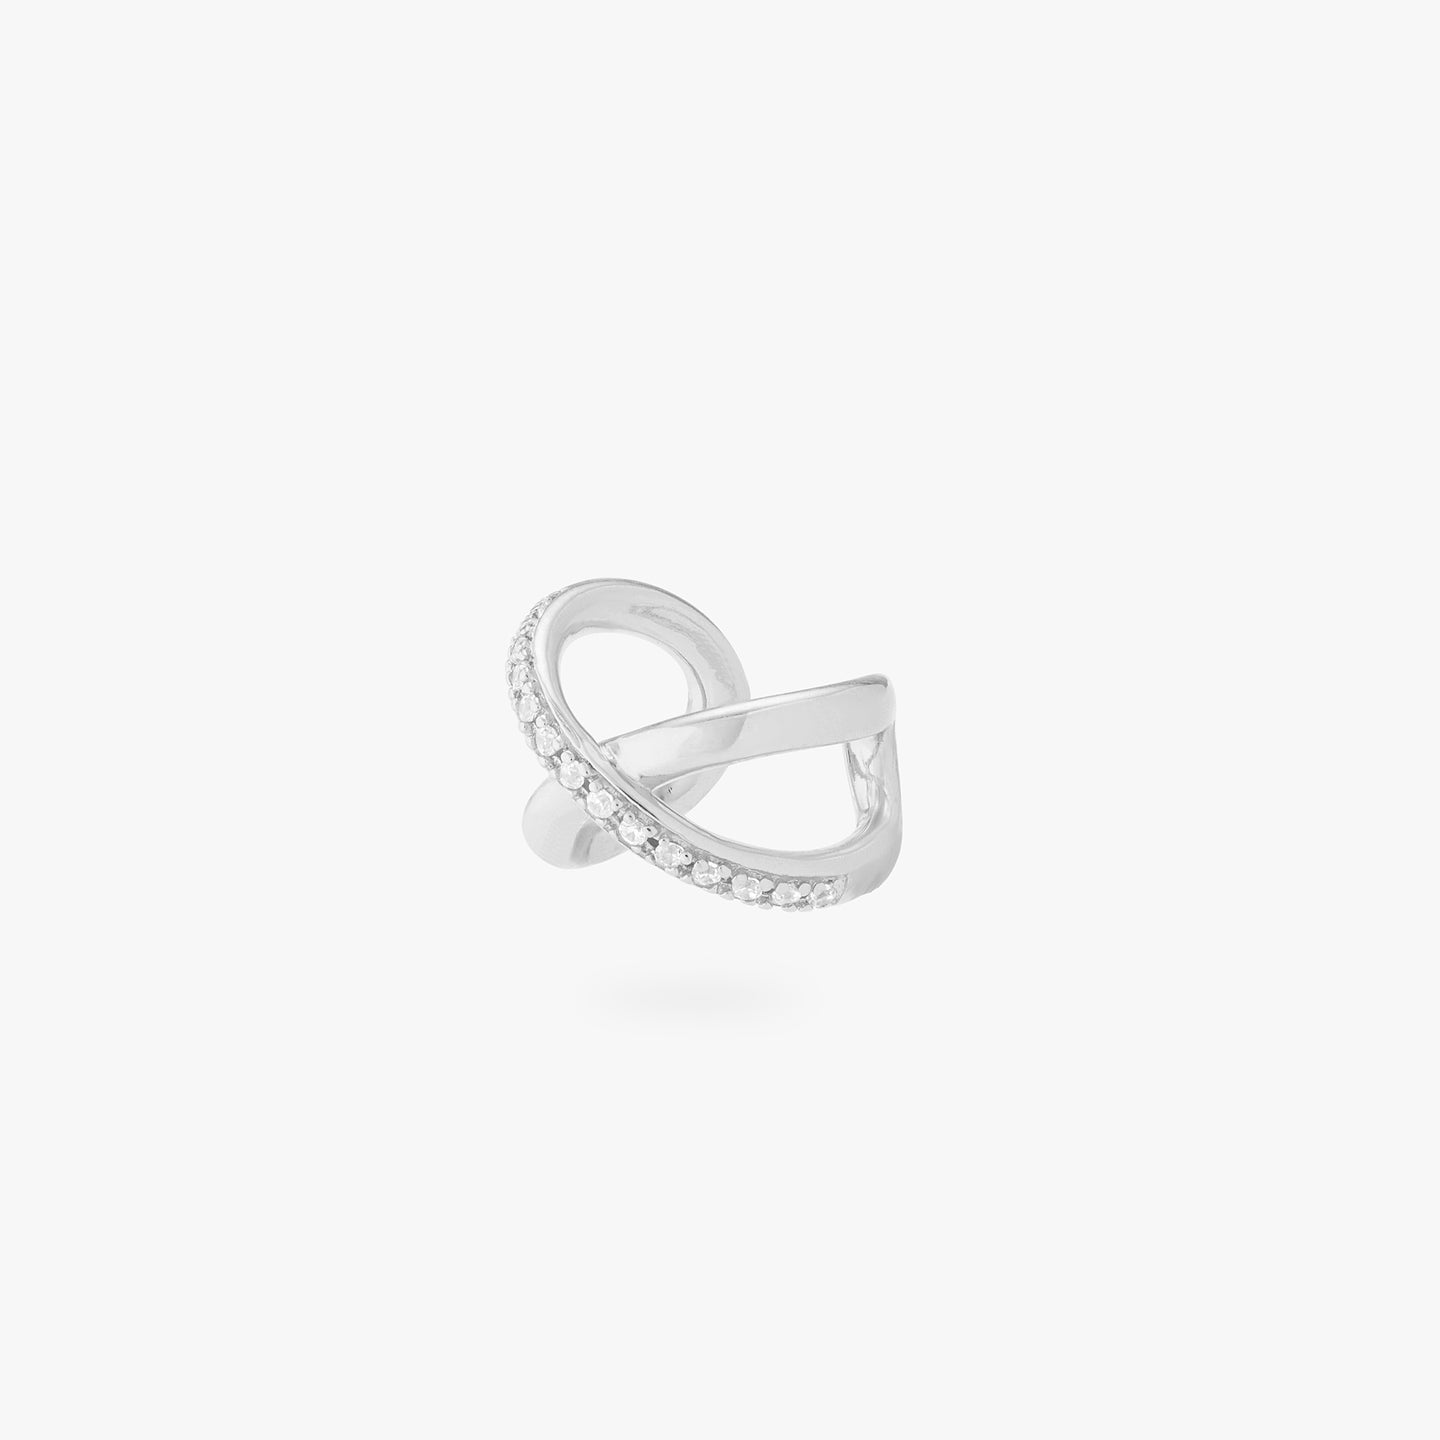 This is an image of a silver twist cuff that has one side of the twist diagonally lined with silver/clear CZs. color:null|silver/clear